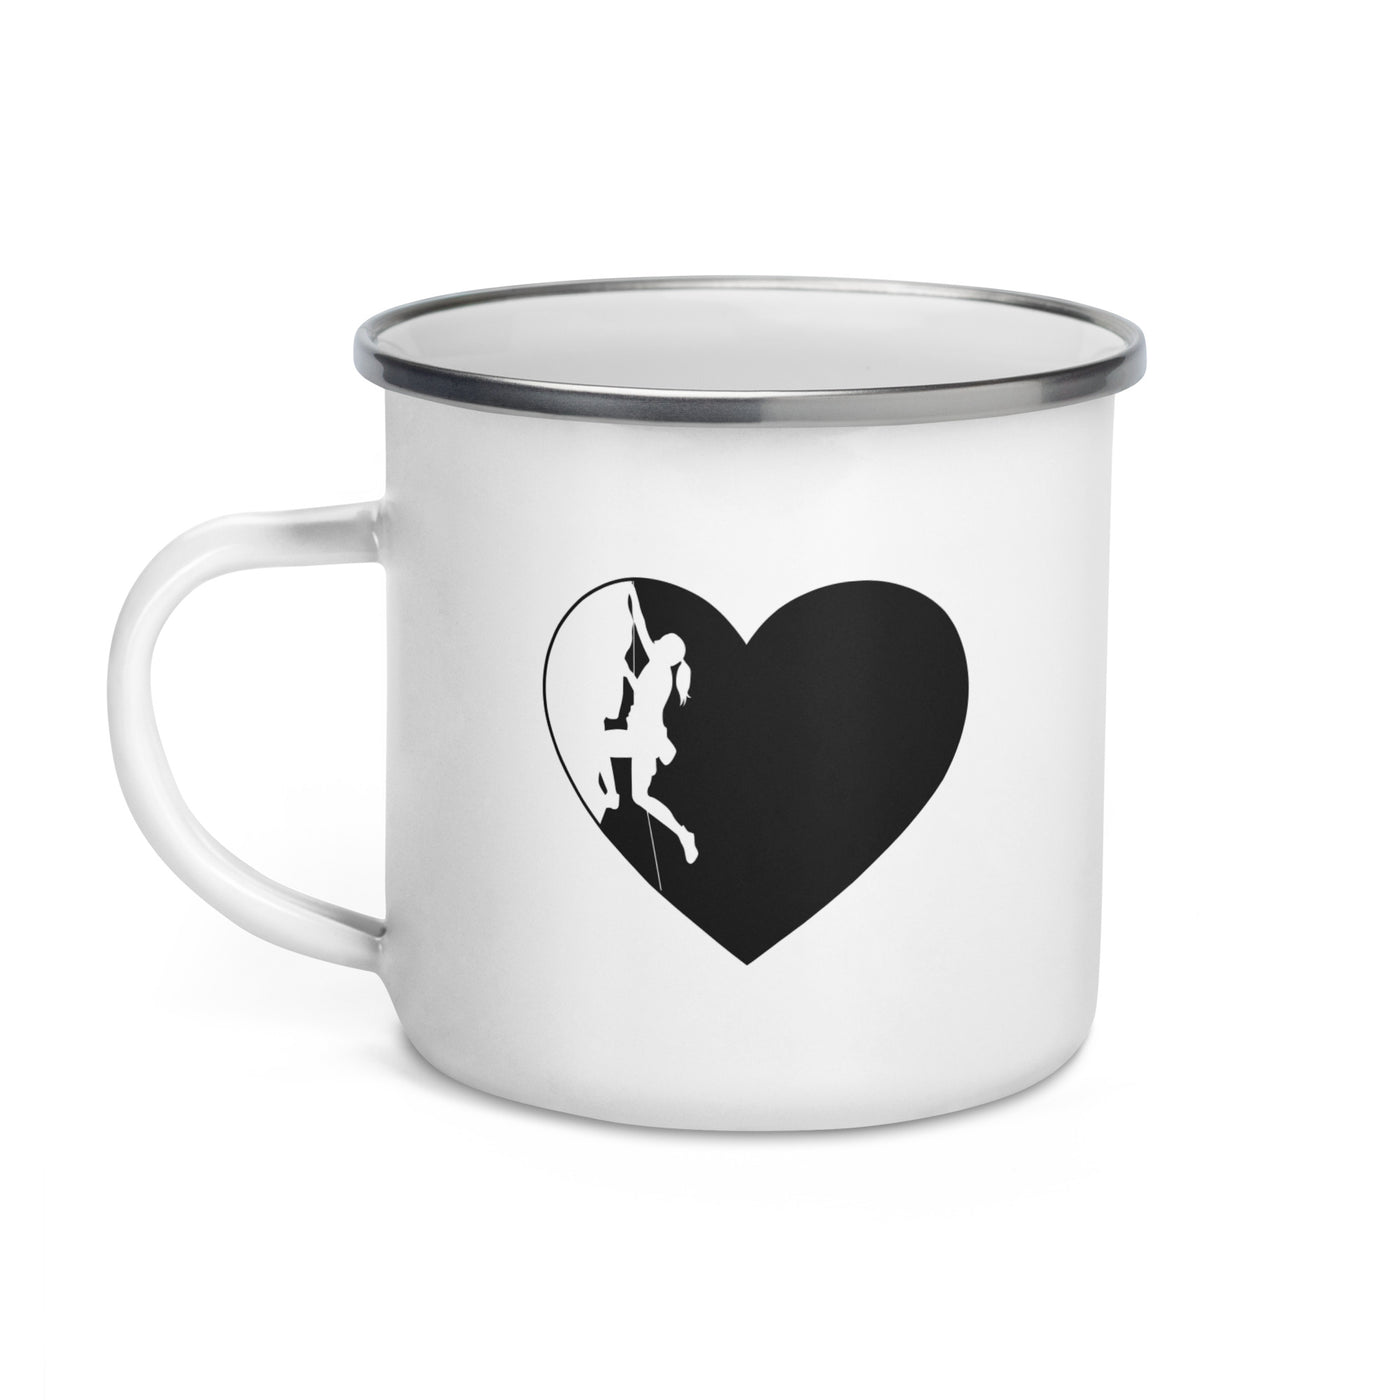 Heart 1 And Climbing - Emaille Tasse klettern